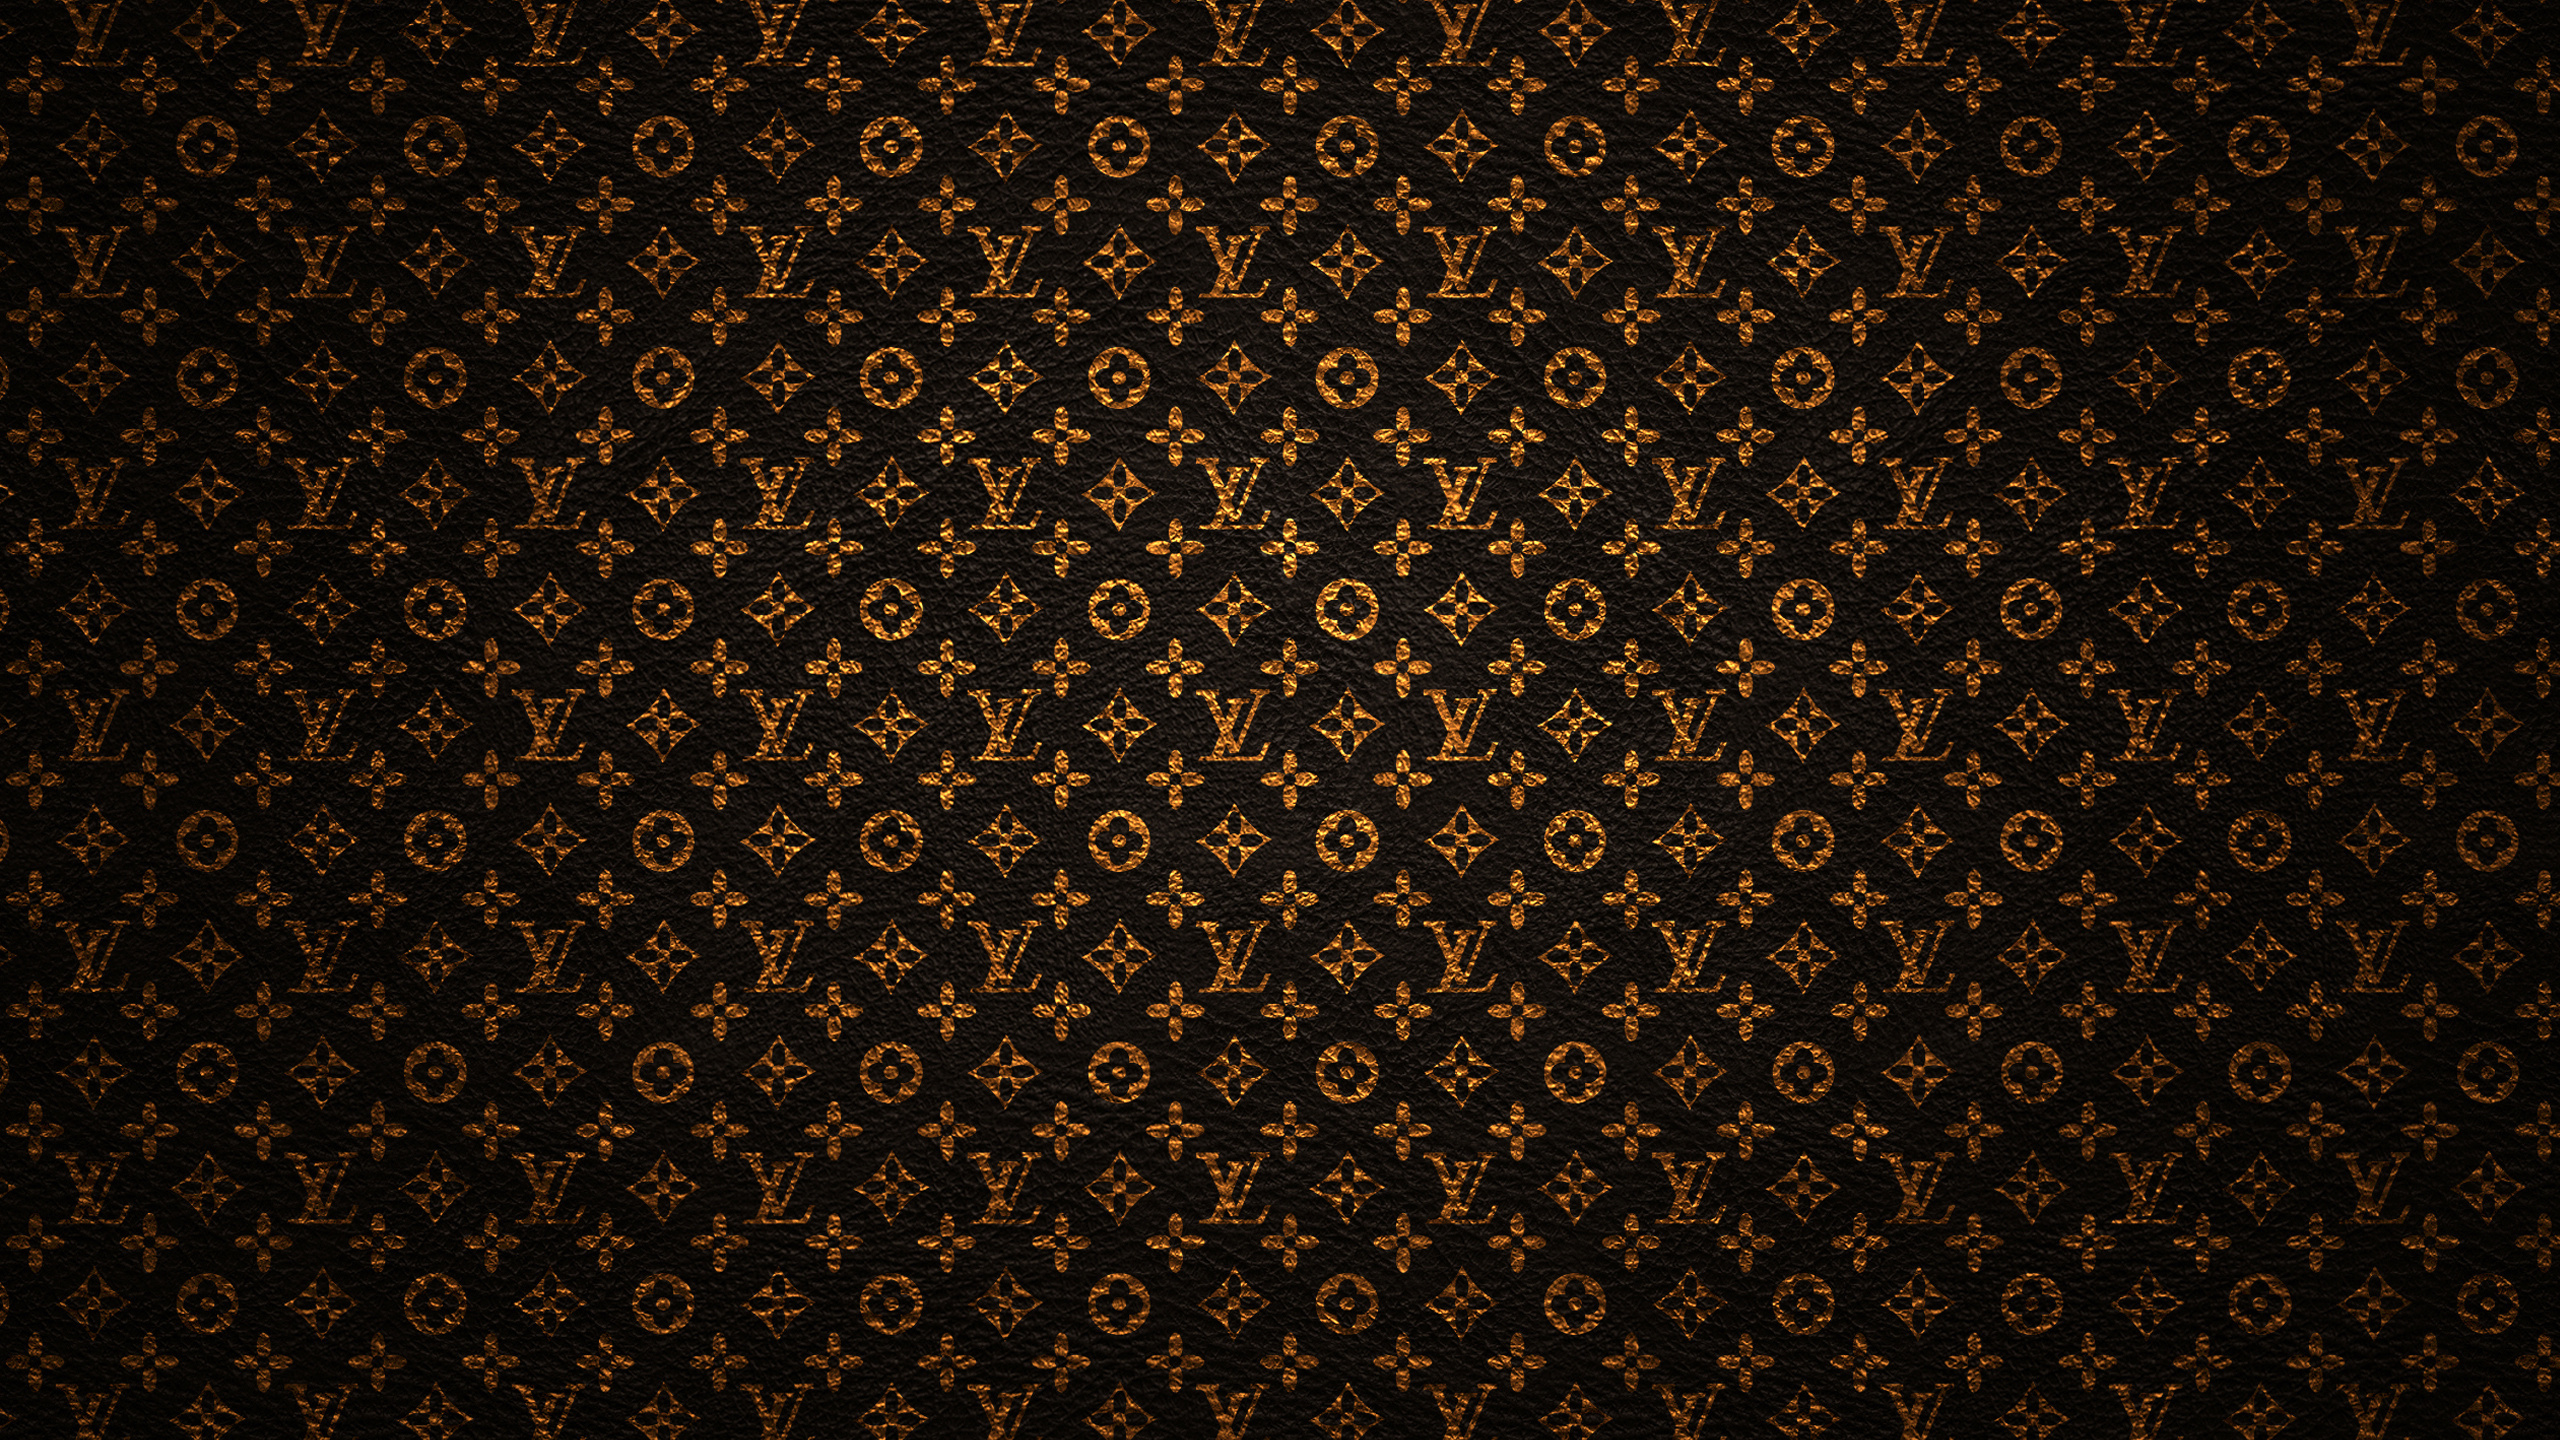 Products Louis Vuitton HD Wallpaper | Background Image